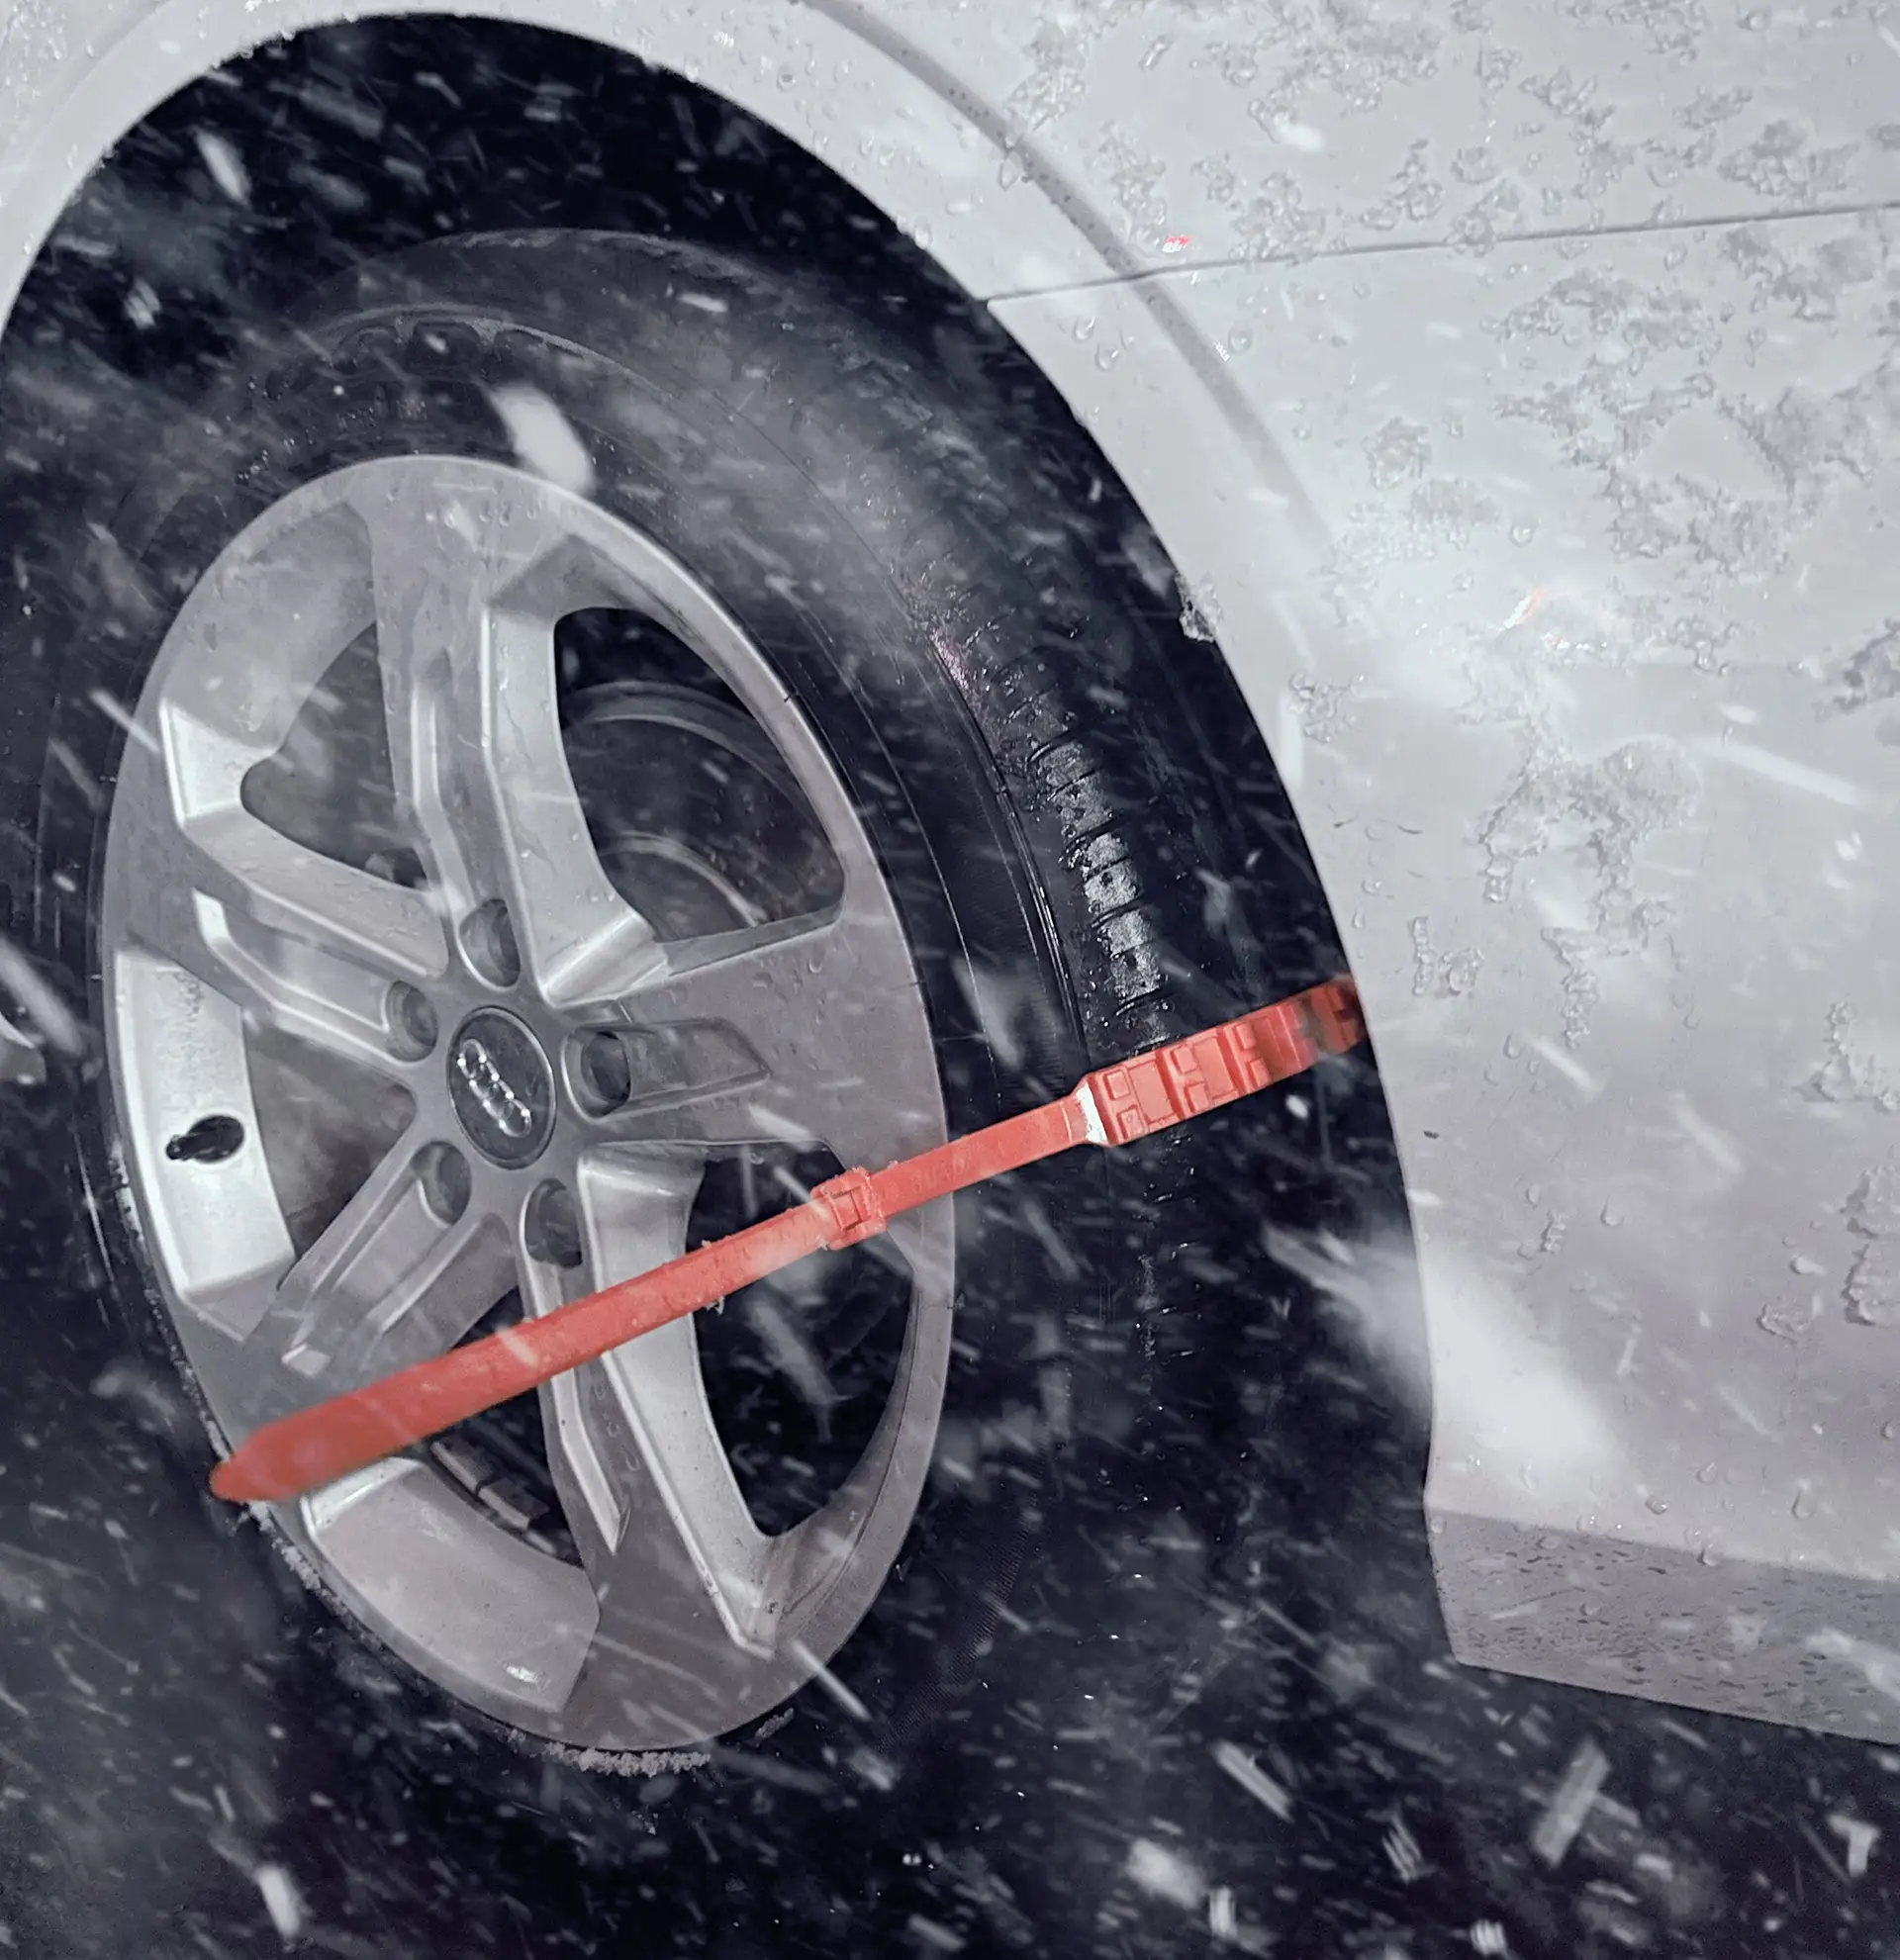 Using Zip Tie Snow Chains in Snowy Conditions